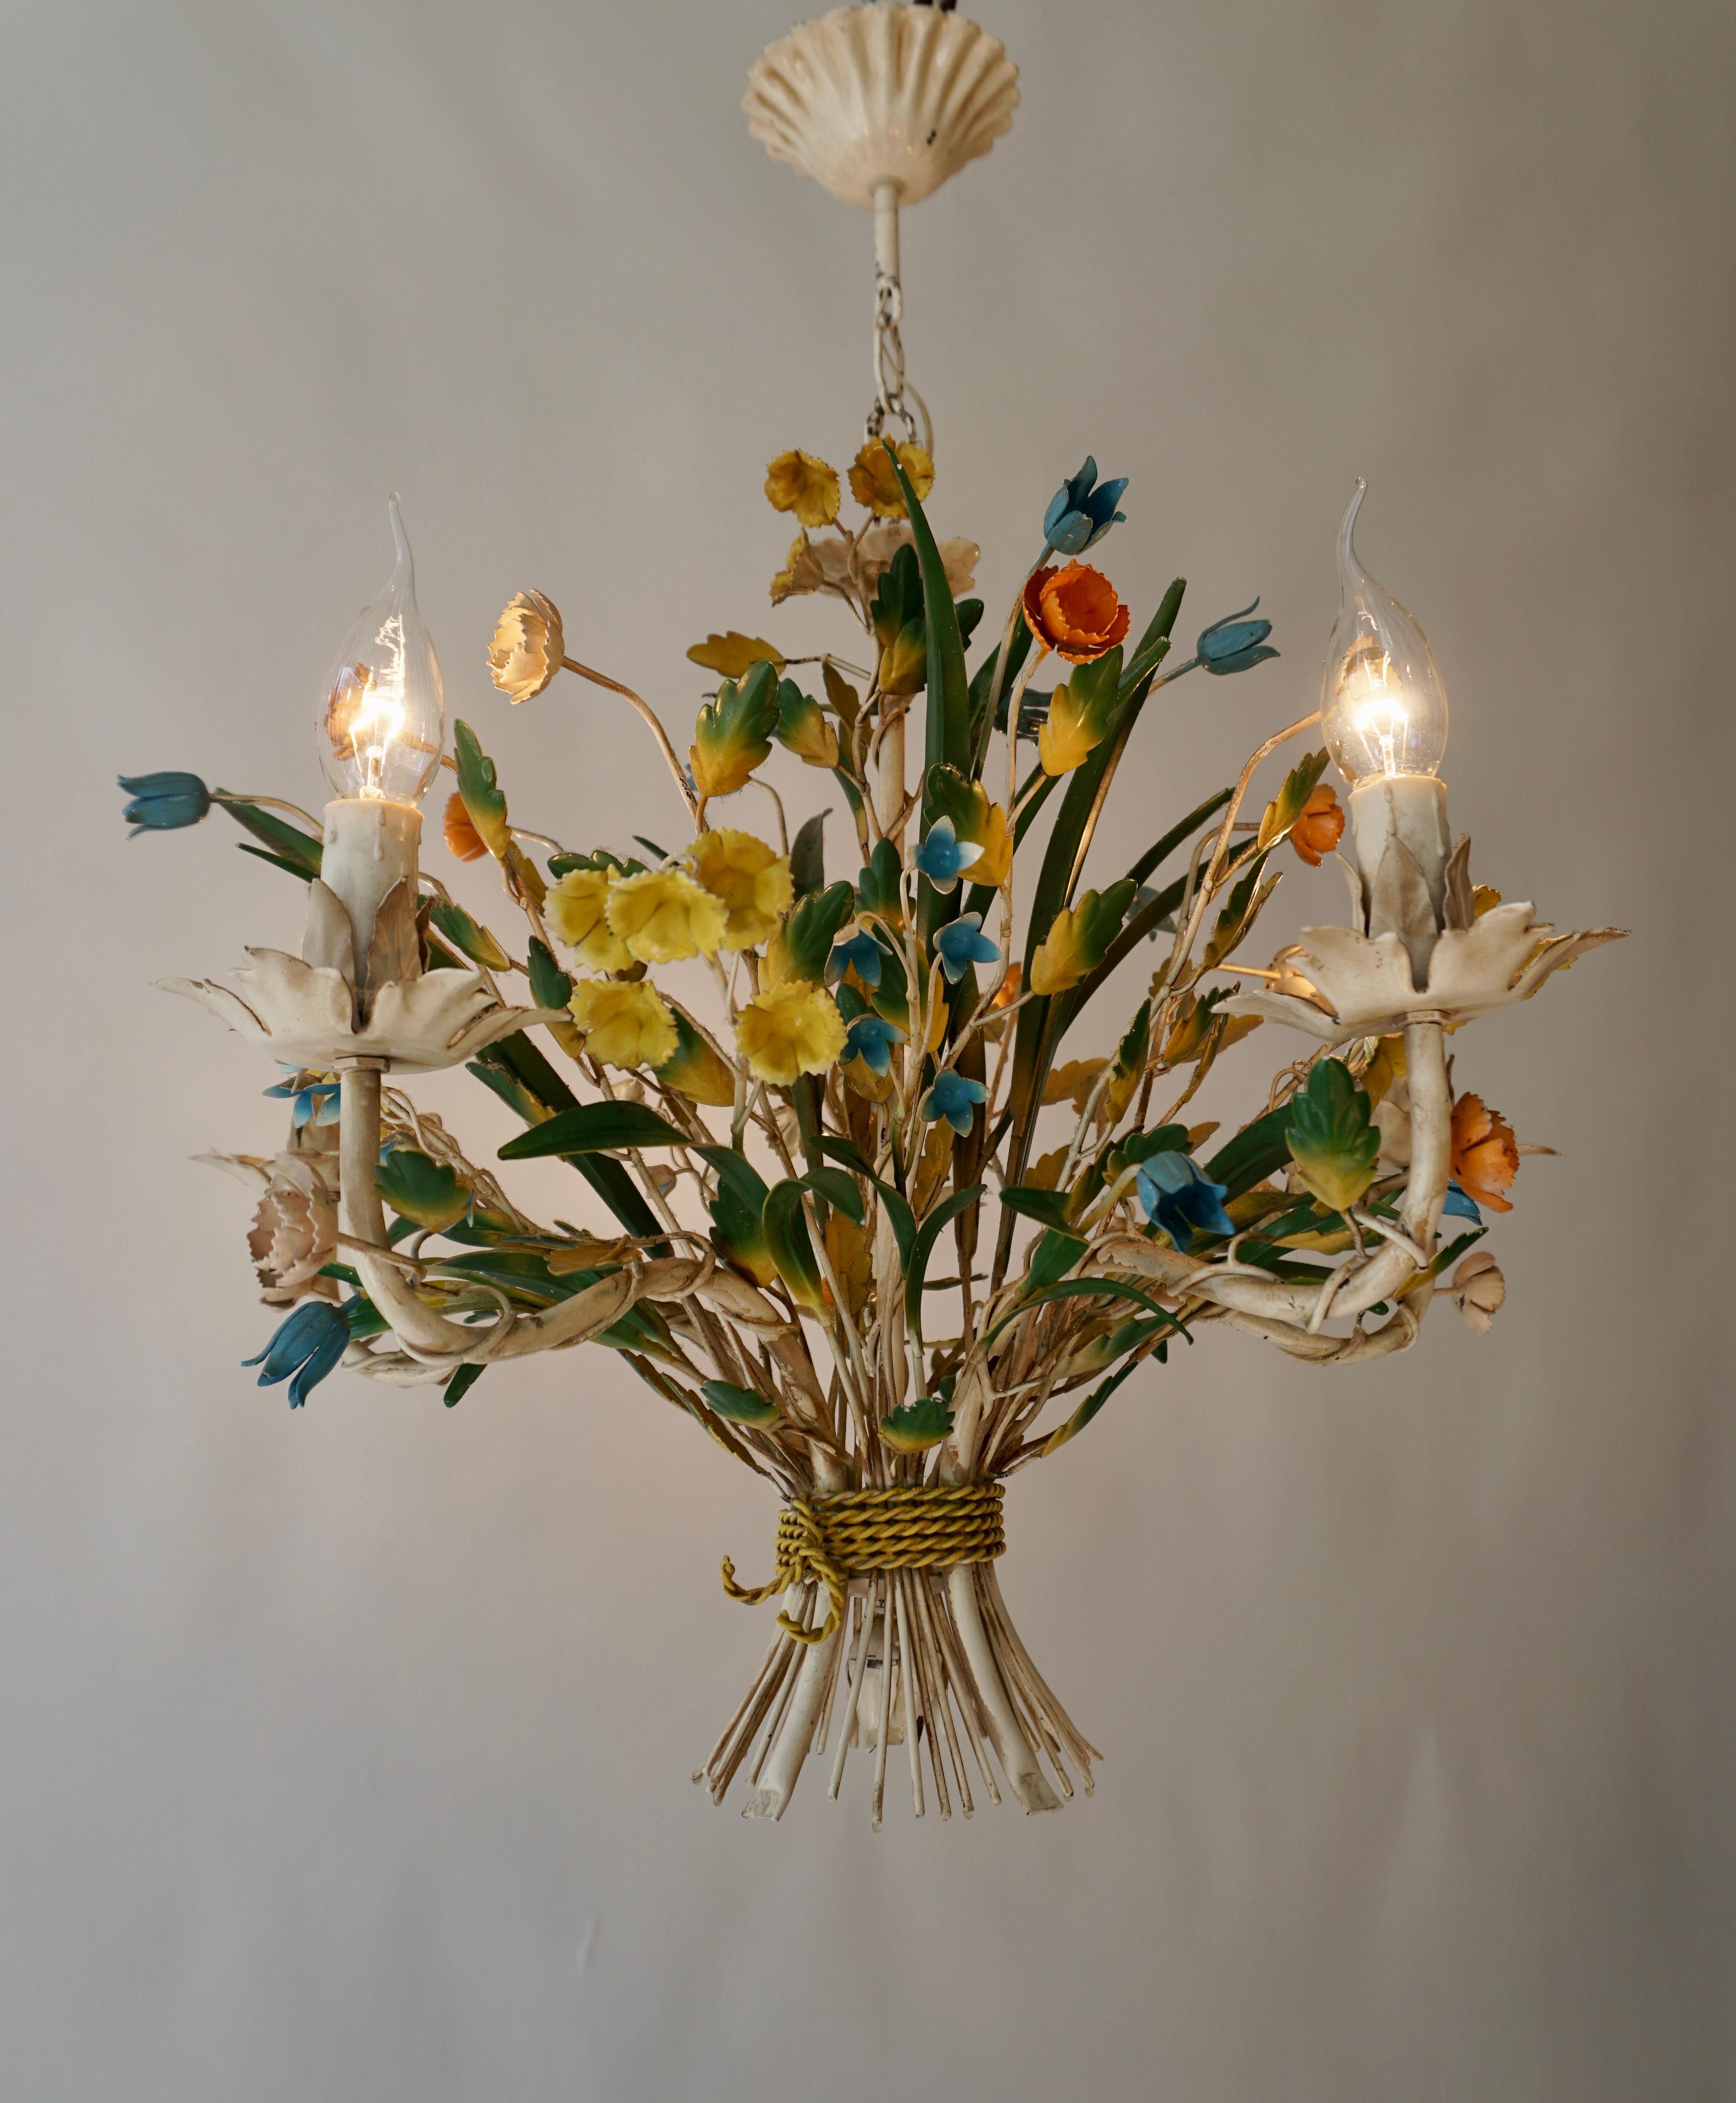 A vintage tole five-light chandelier with yellow, green and orange flowers and leaf accents.Original paint finish in vibrant greens, and white.

Diameter,55 cm.
Height fixture 45 cm.
Total height 65 cm.

The light requires five single E14 screw fit